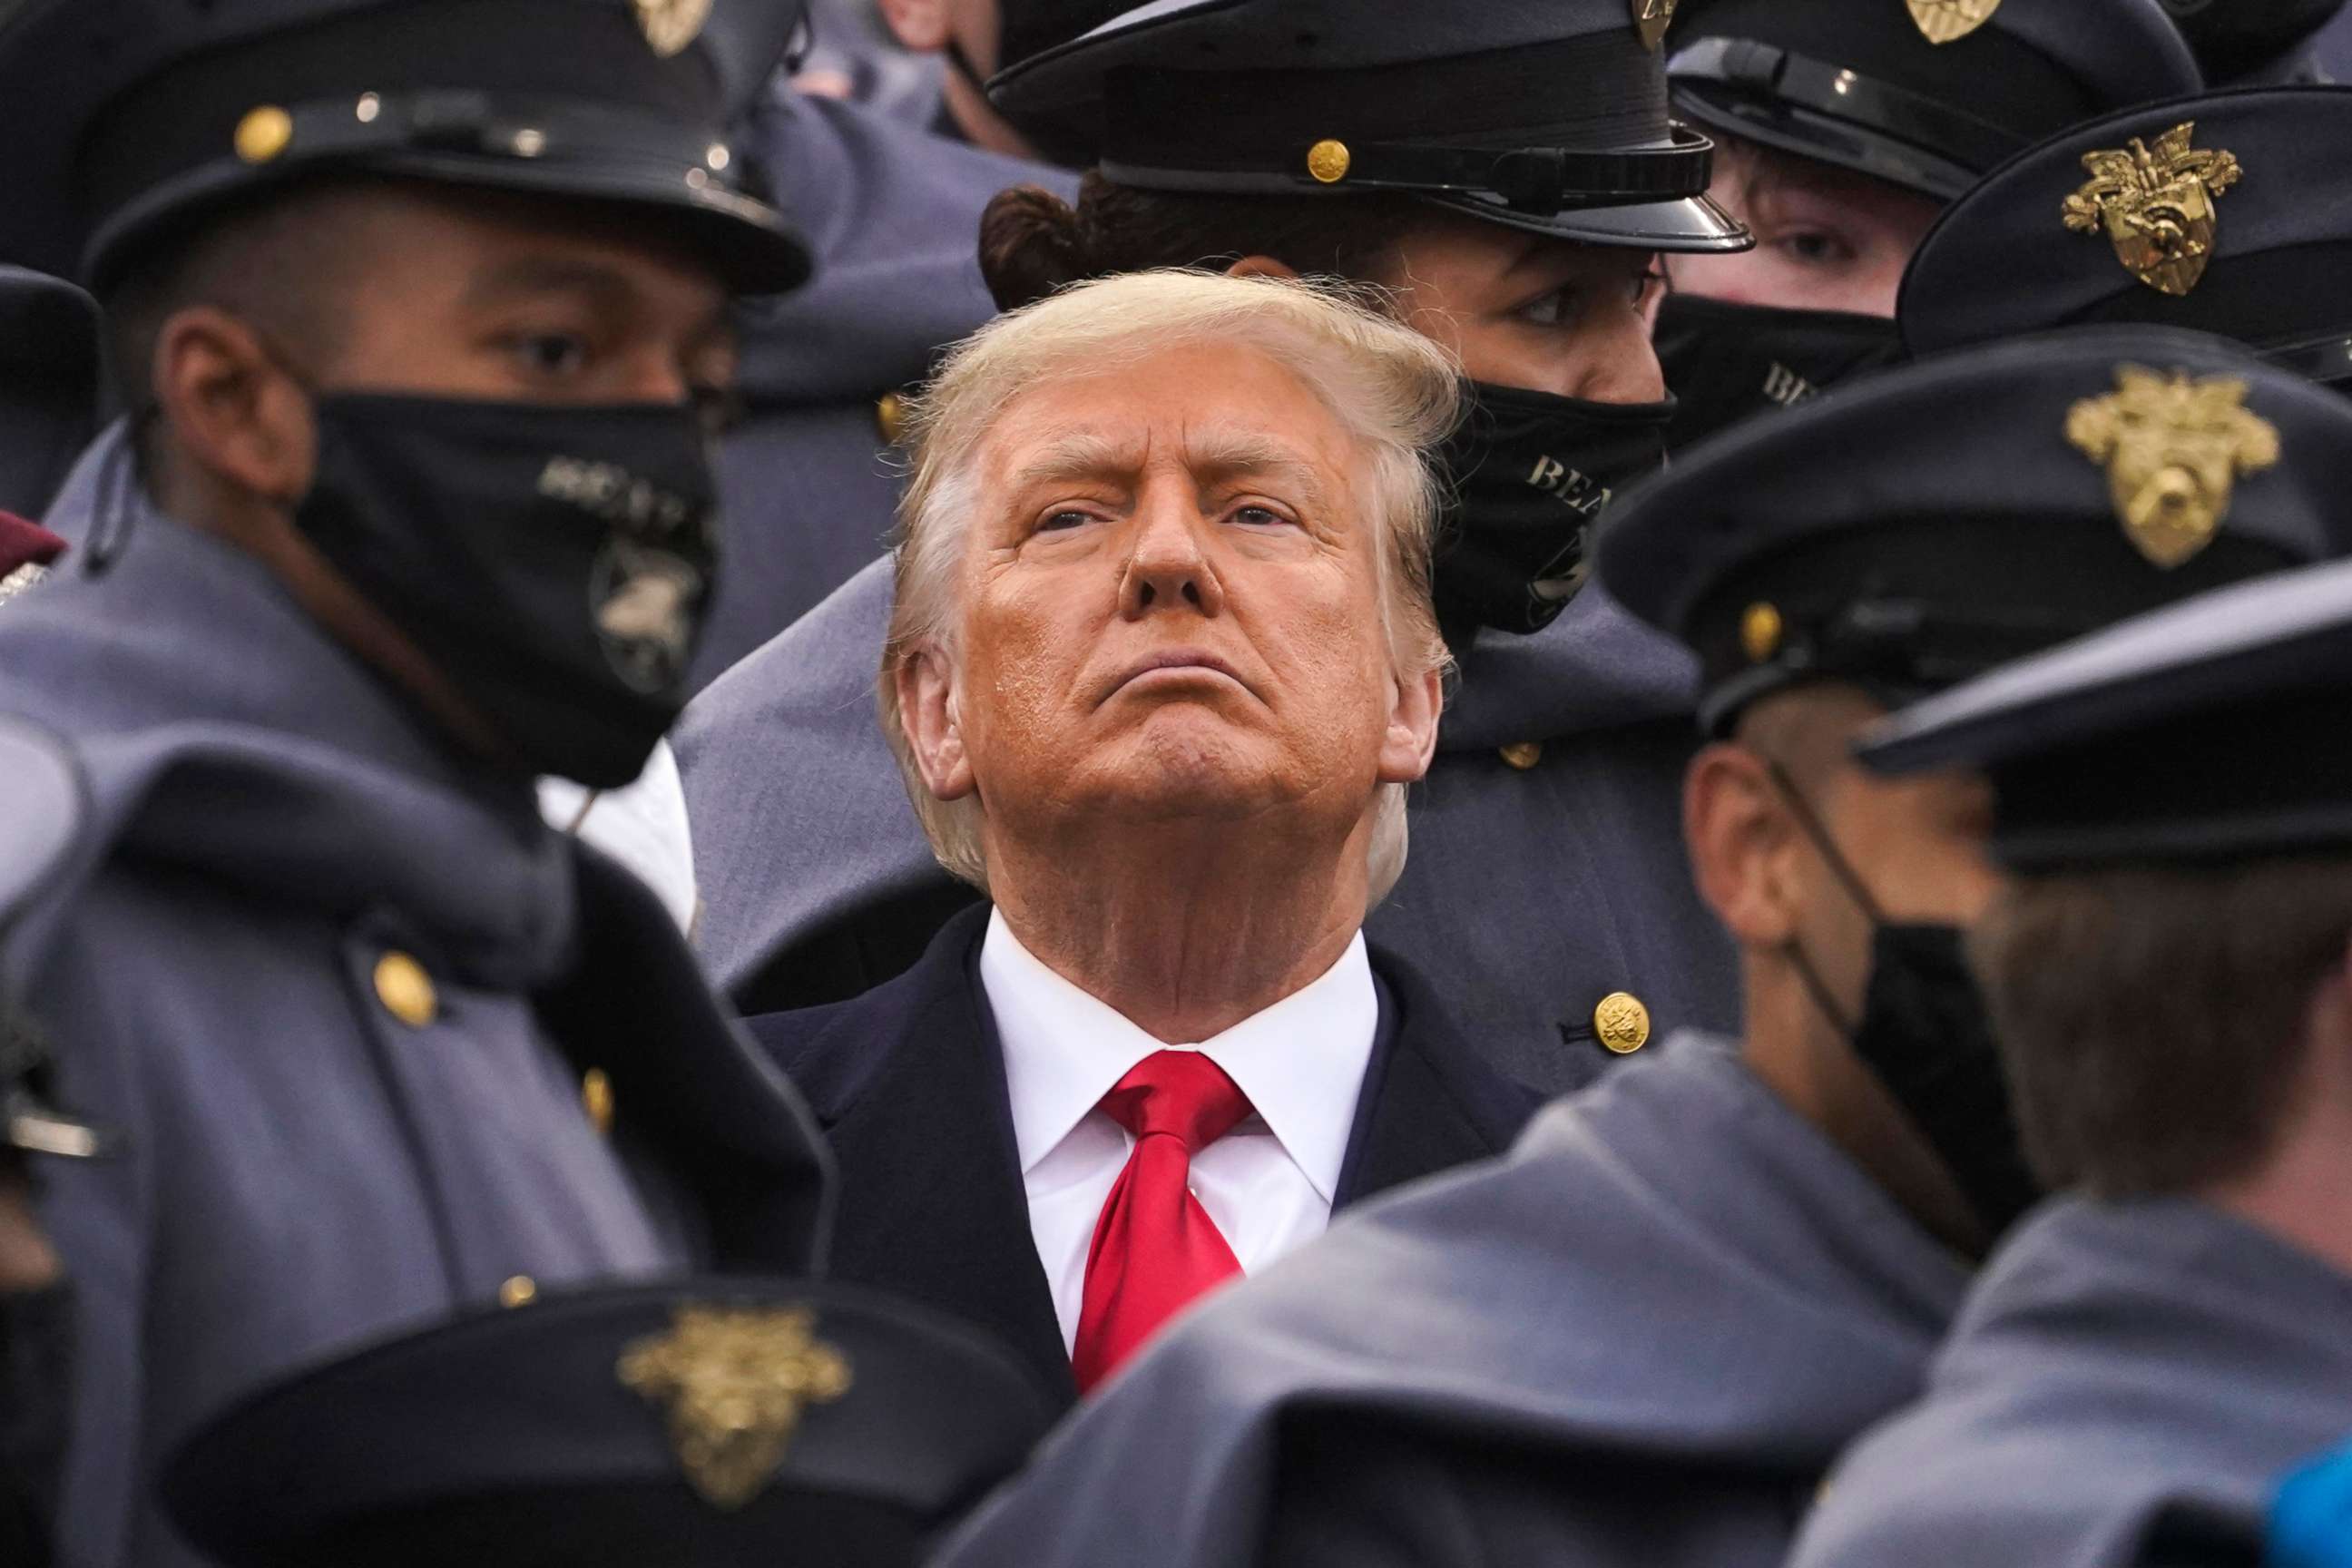 PHOTO: Surrounded by Army cadets, President Donald Trump watches the first half of the 121st Army-Navy Football Game in Michie Stadium at the United States Military Academy, Saturday, Dec. 12, 2020, in West Point, N.Y.